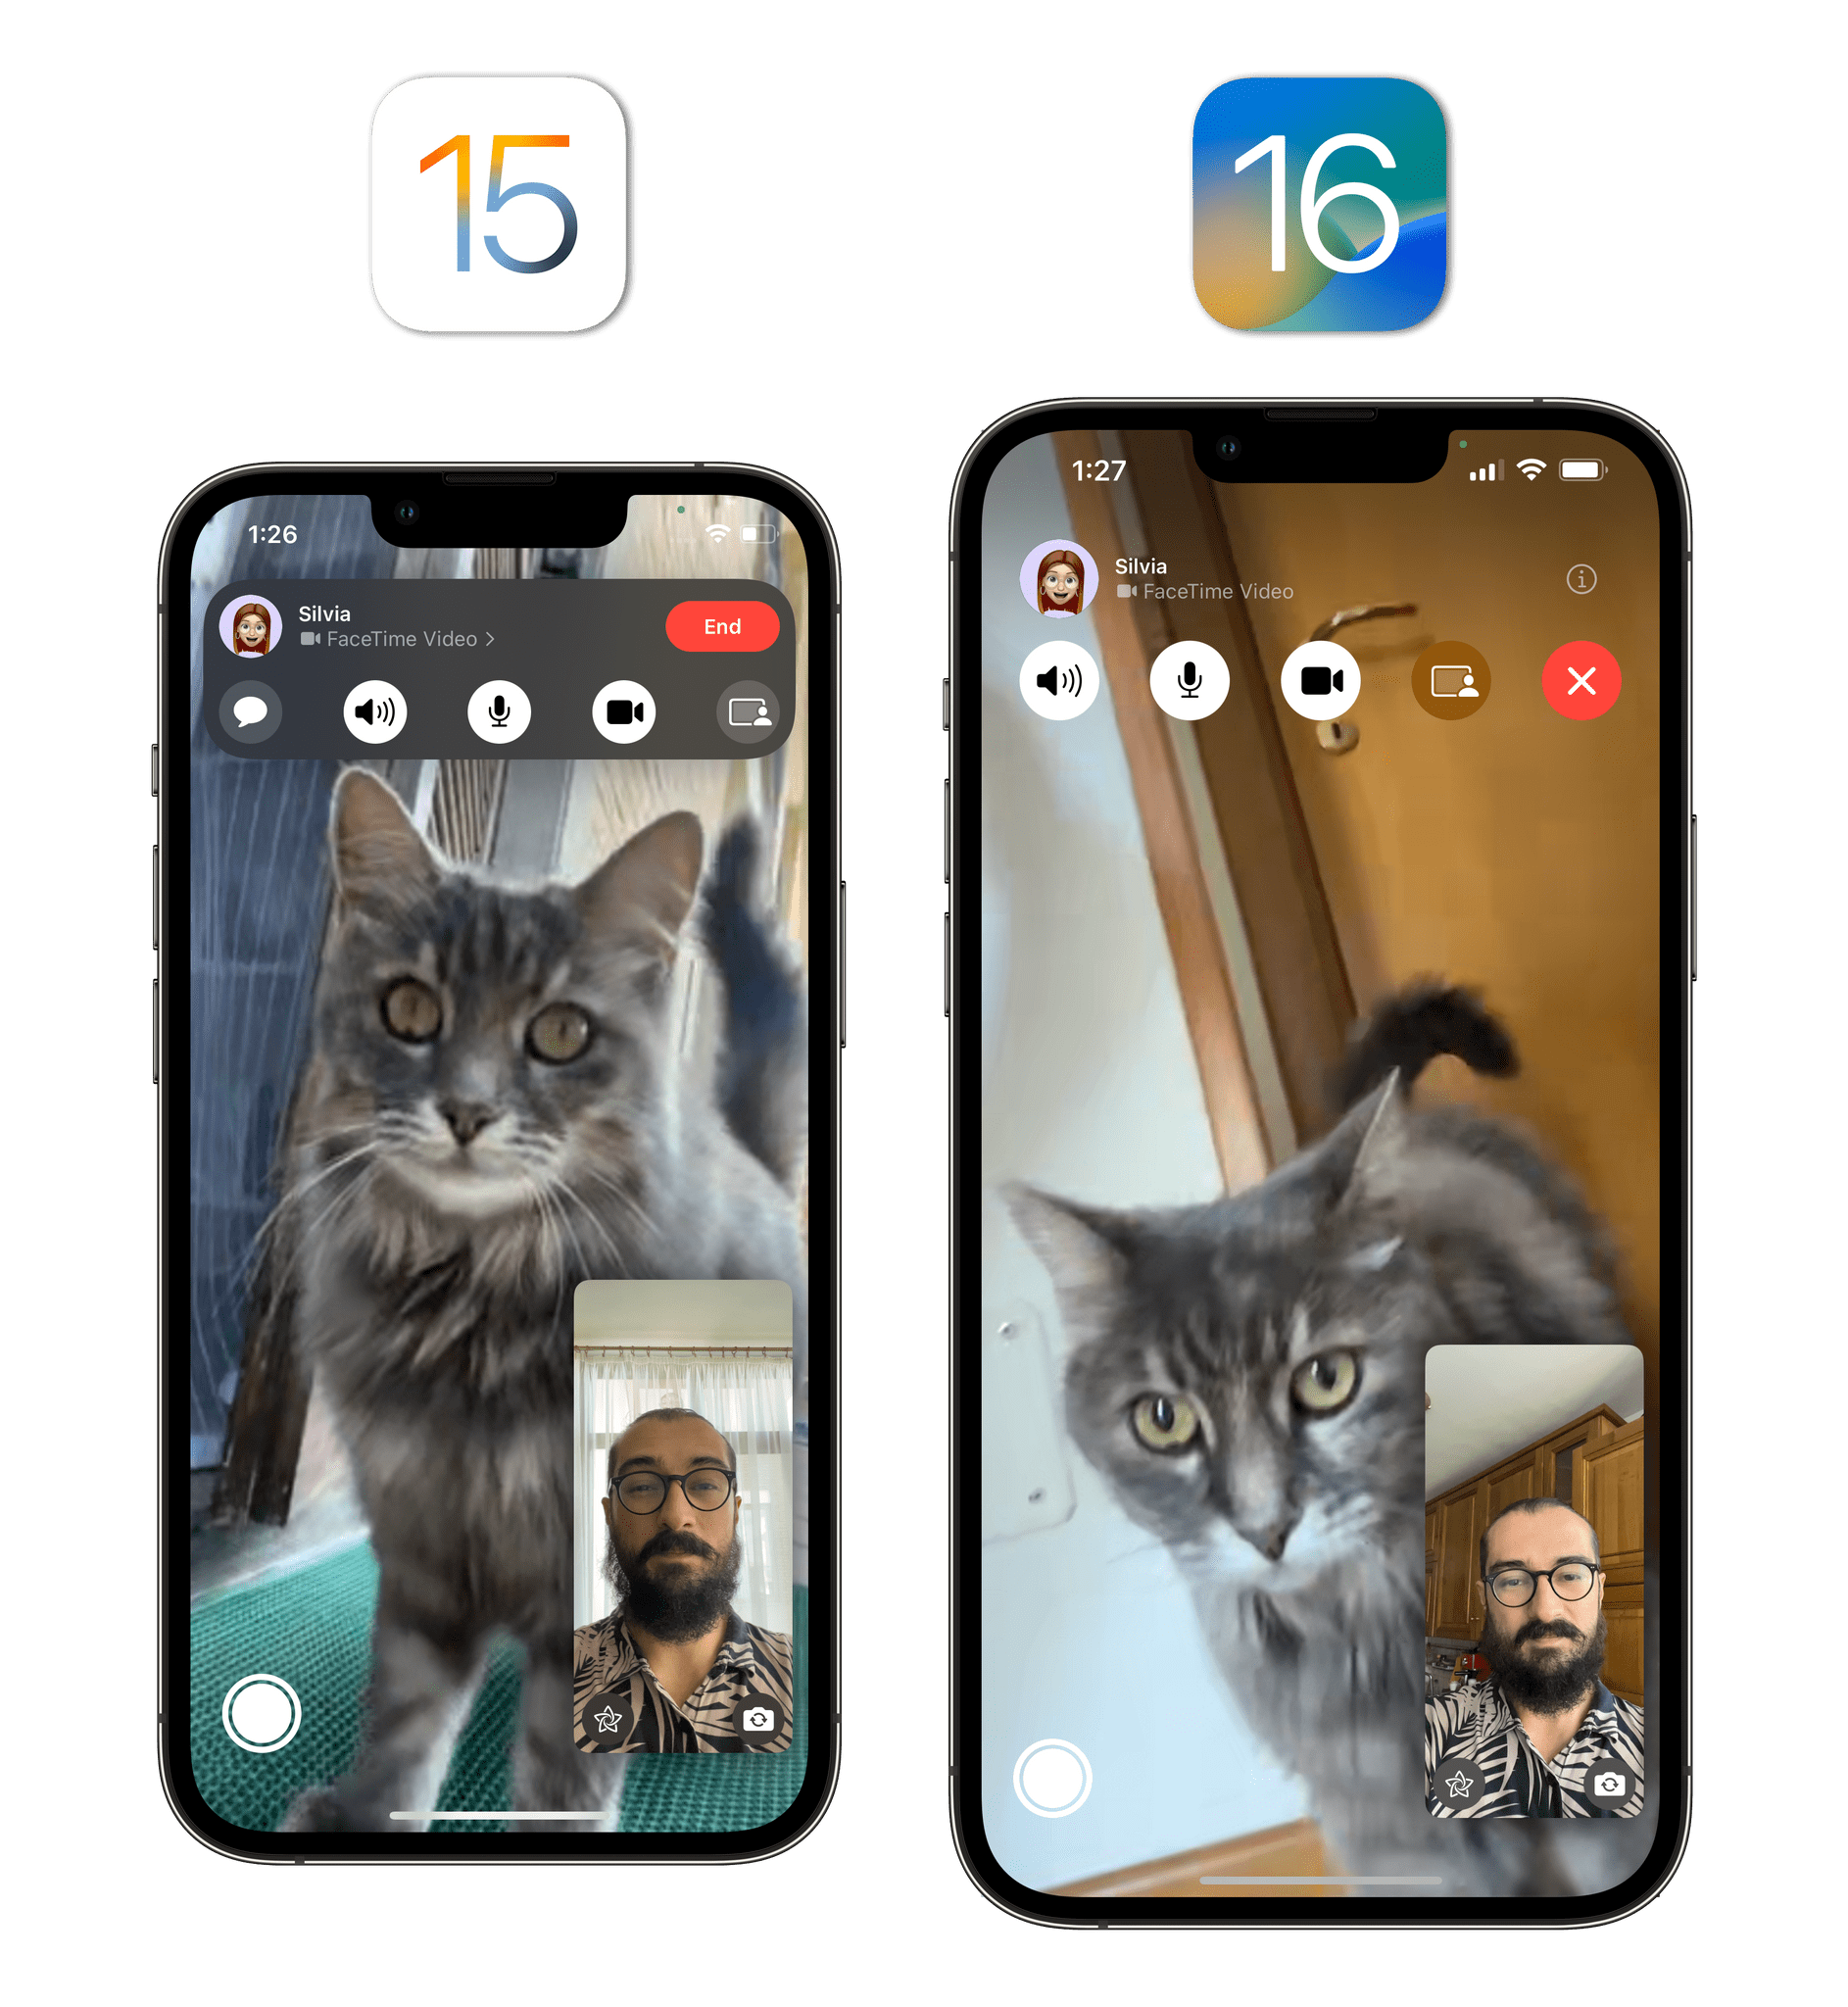 In iOS 16, you'll be able to see more cat. Or a door handle, in this case.